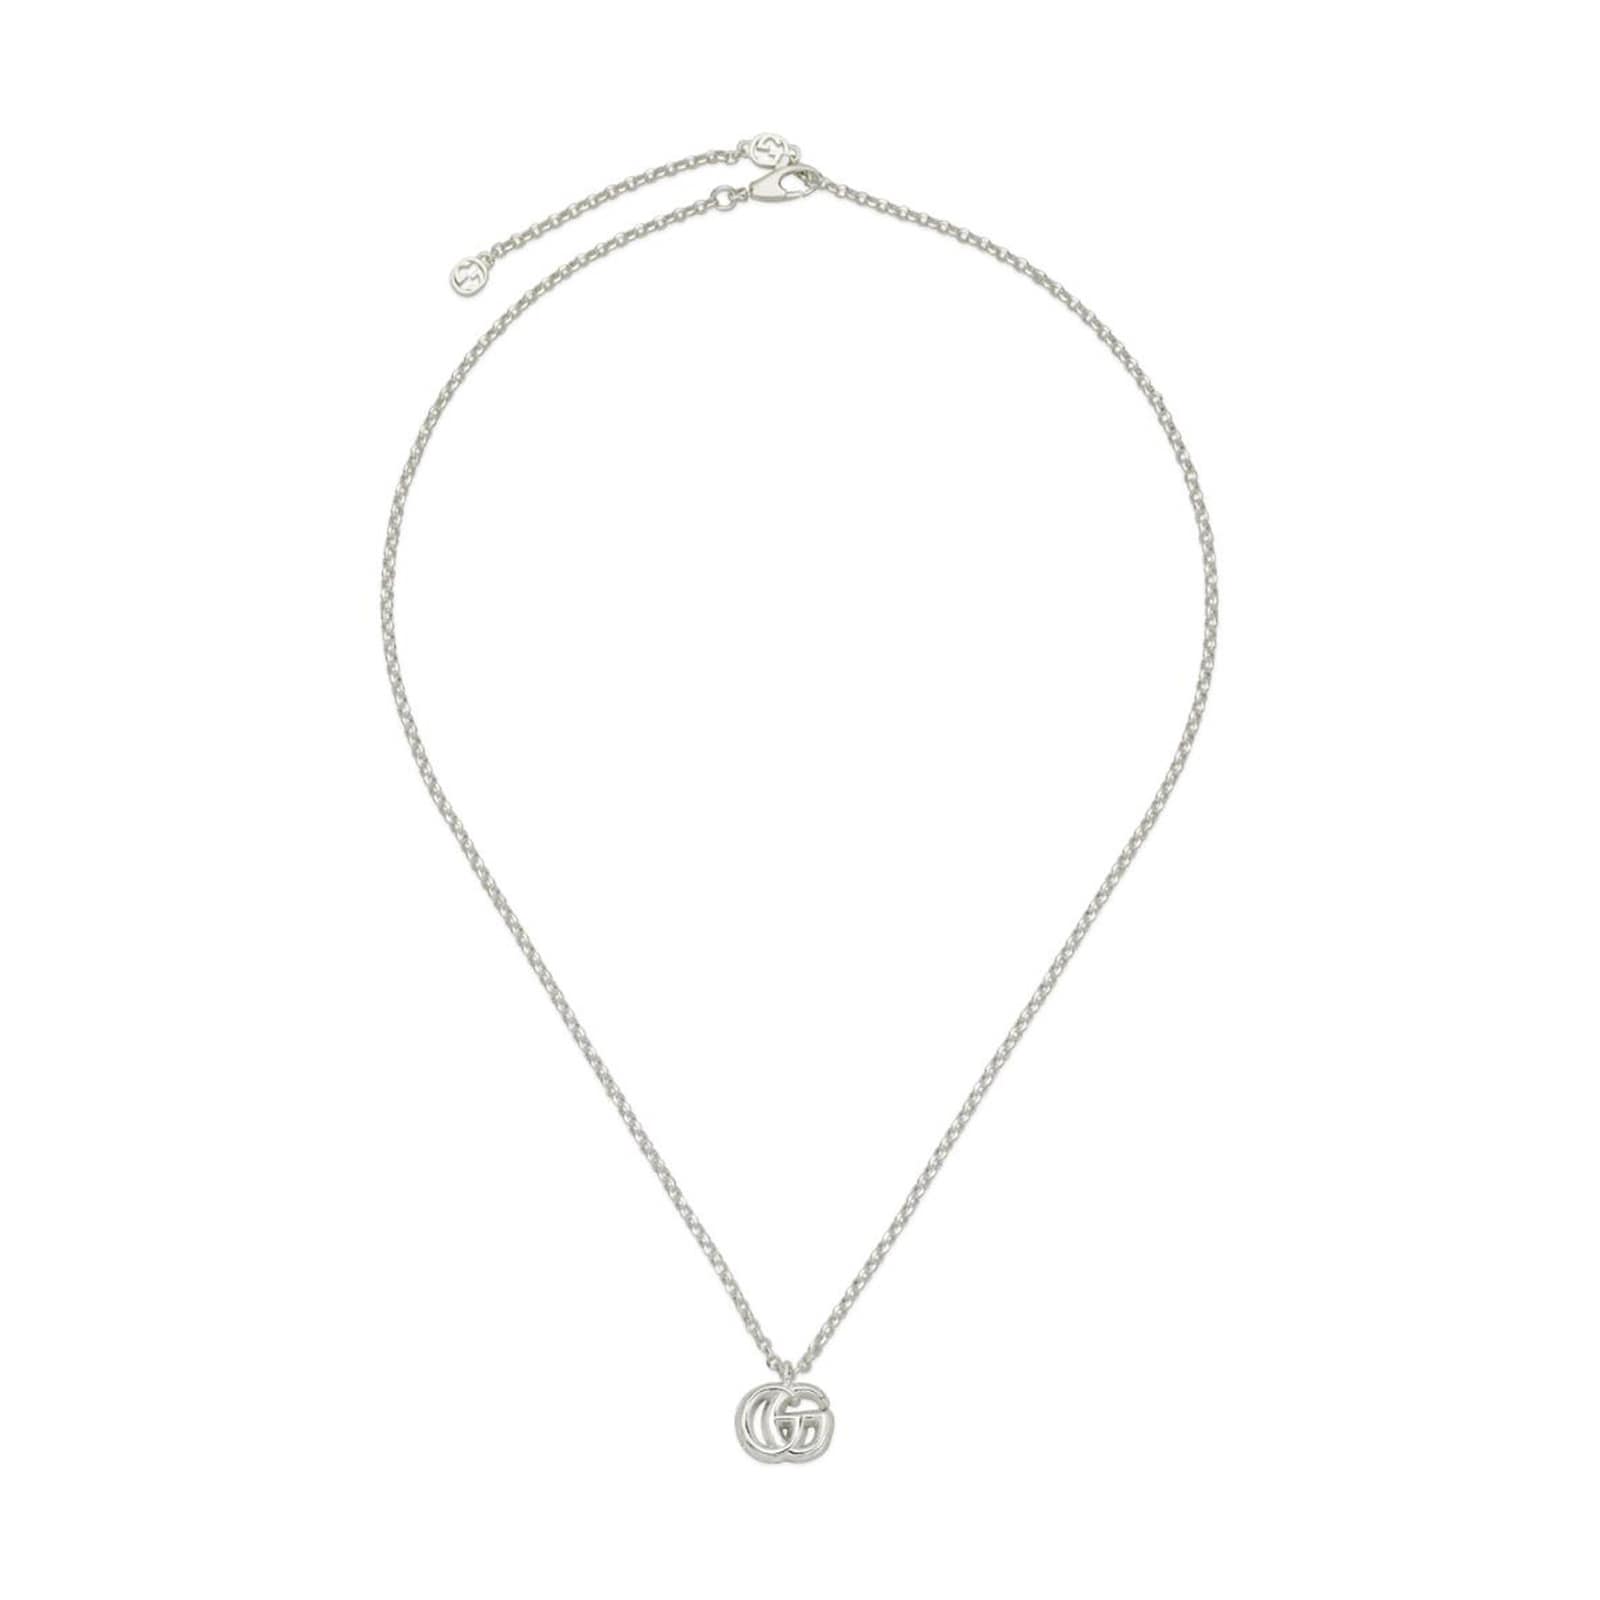 Gucci Sterling Silver GG Marmont Necklace YBB770724001 | Goldsmiths